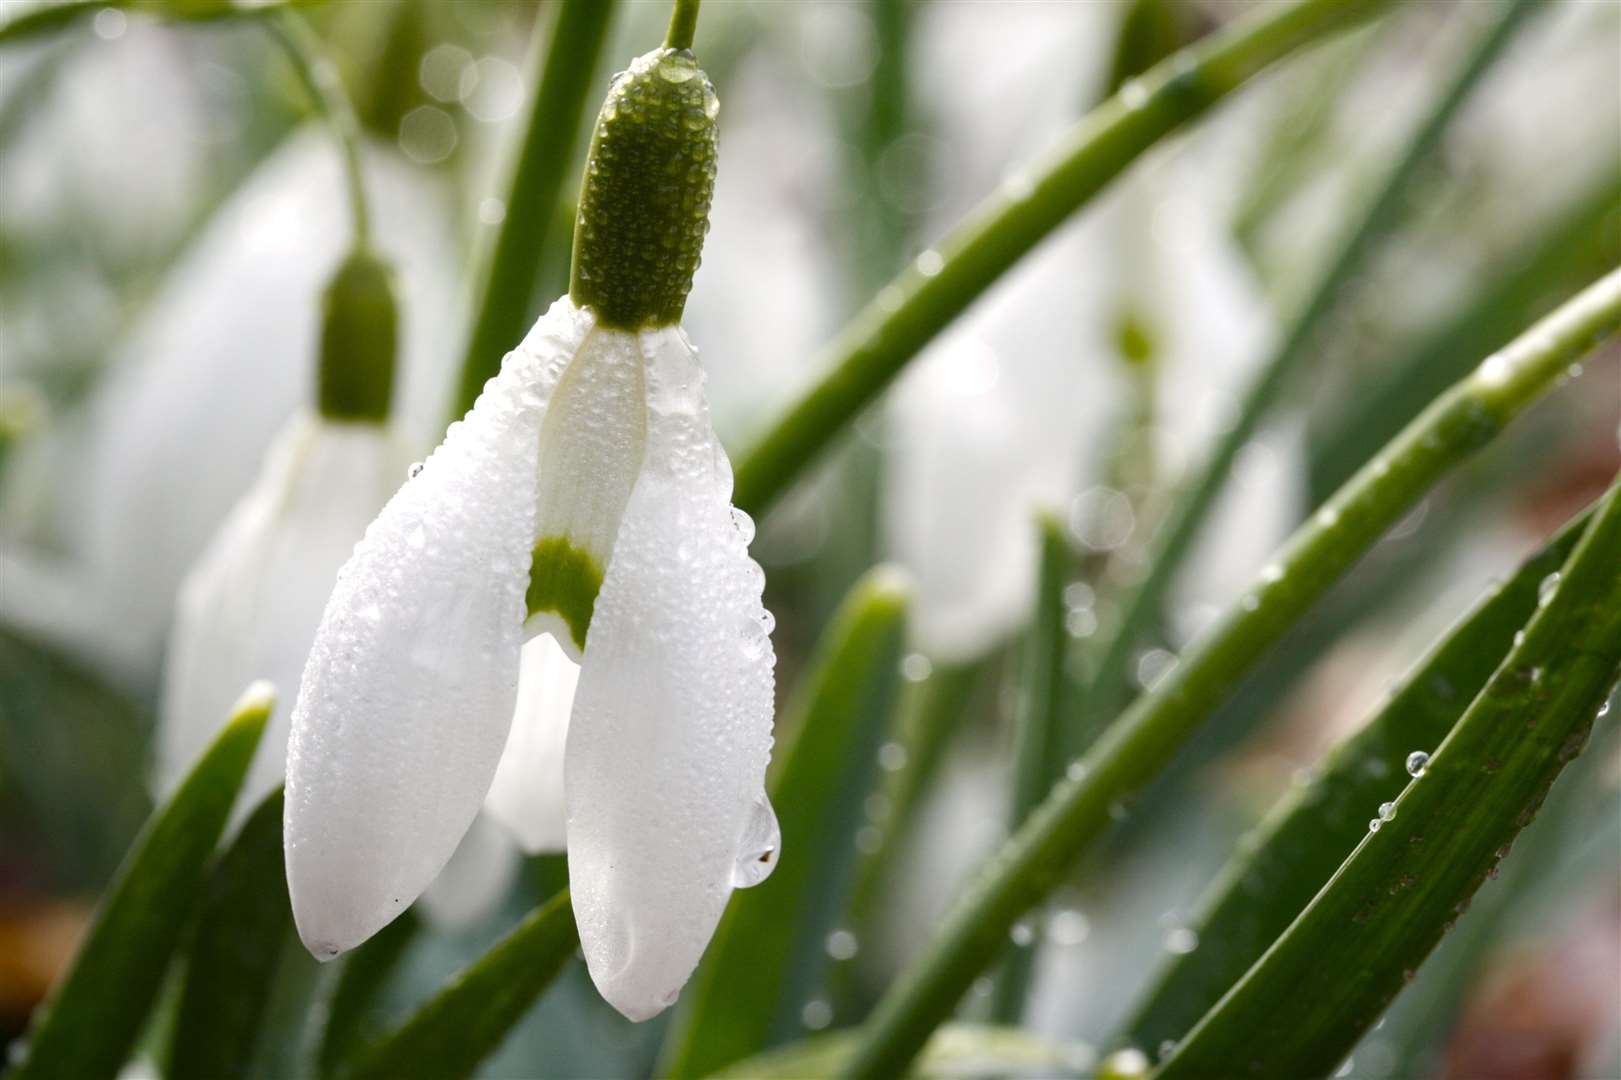 Some snowdrops are very sought-after